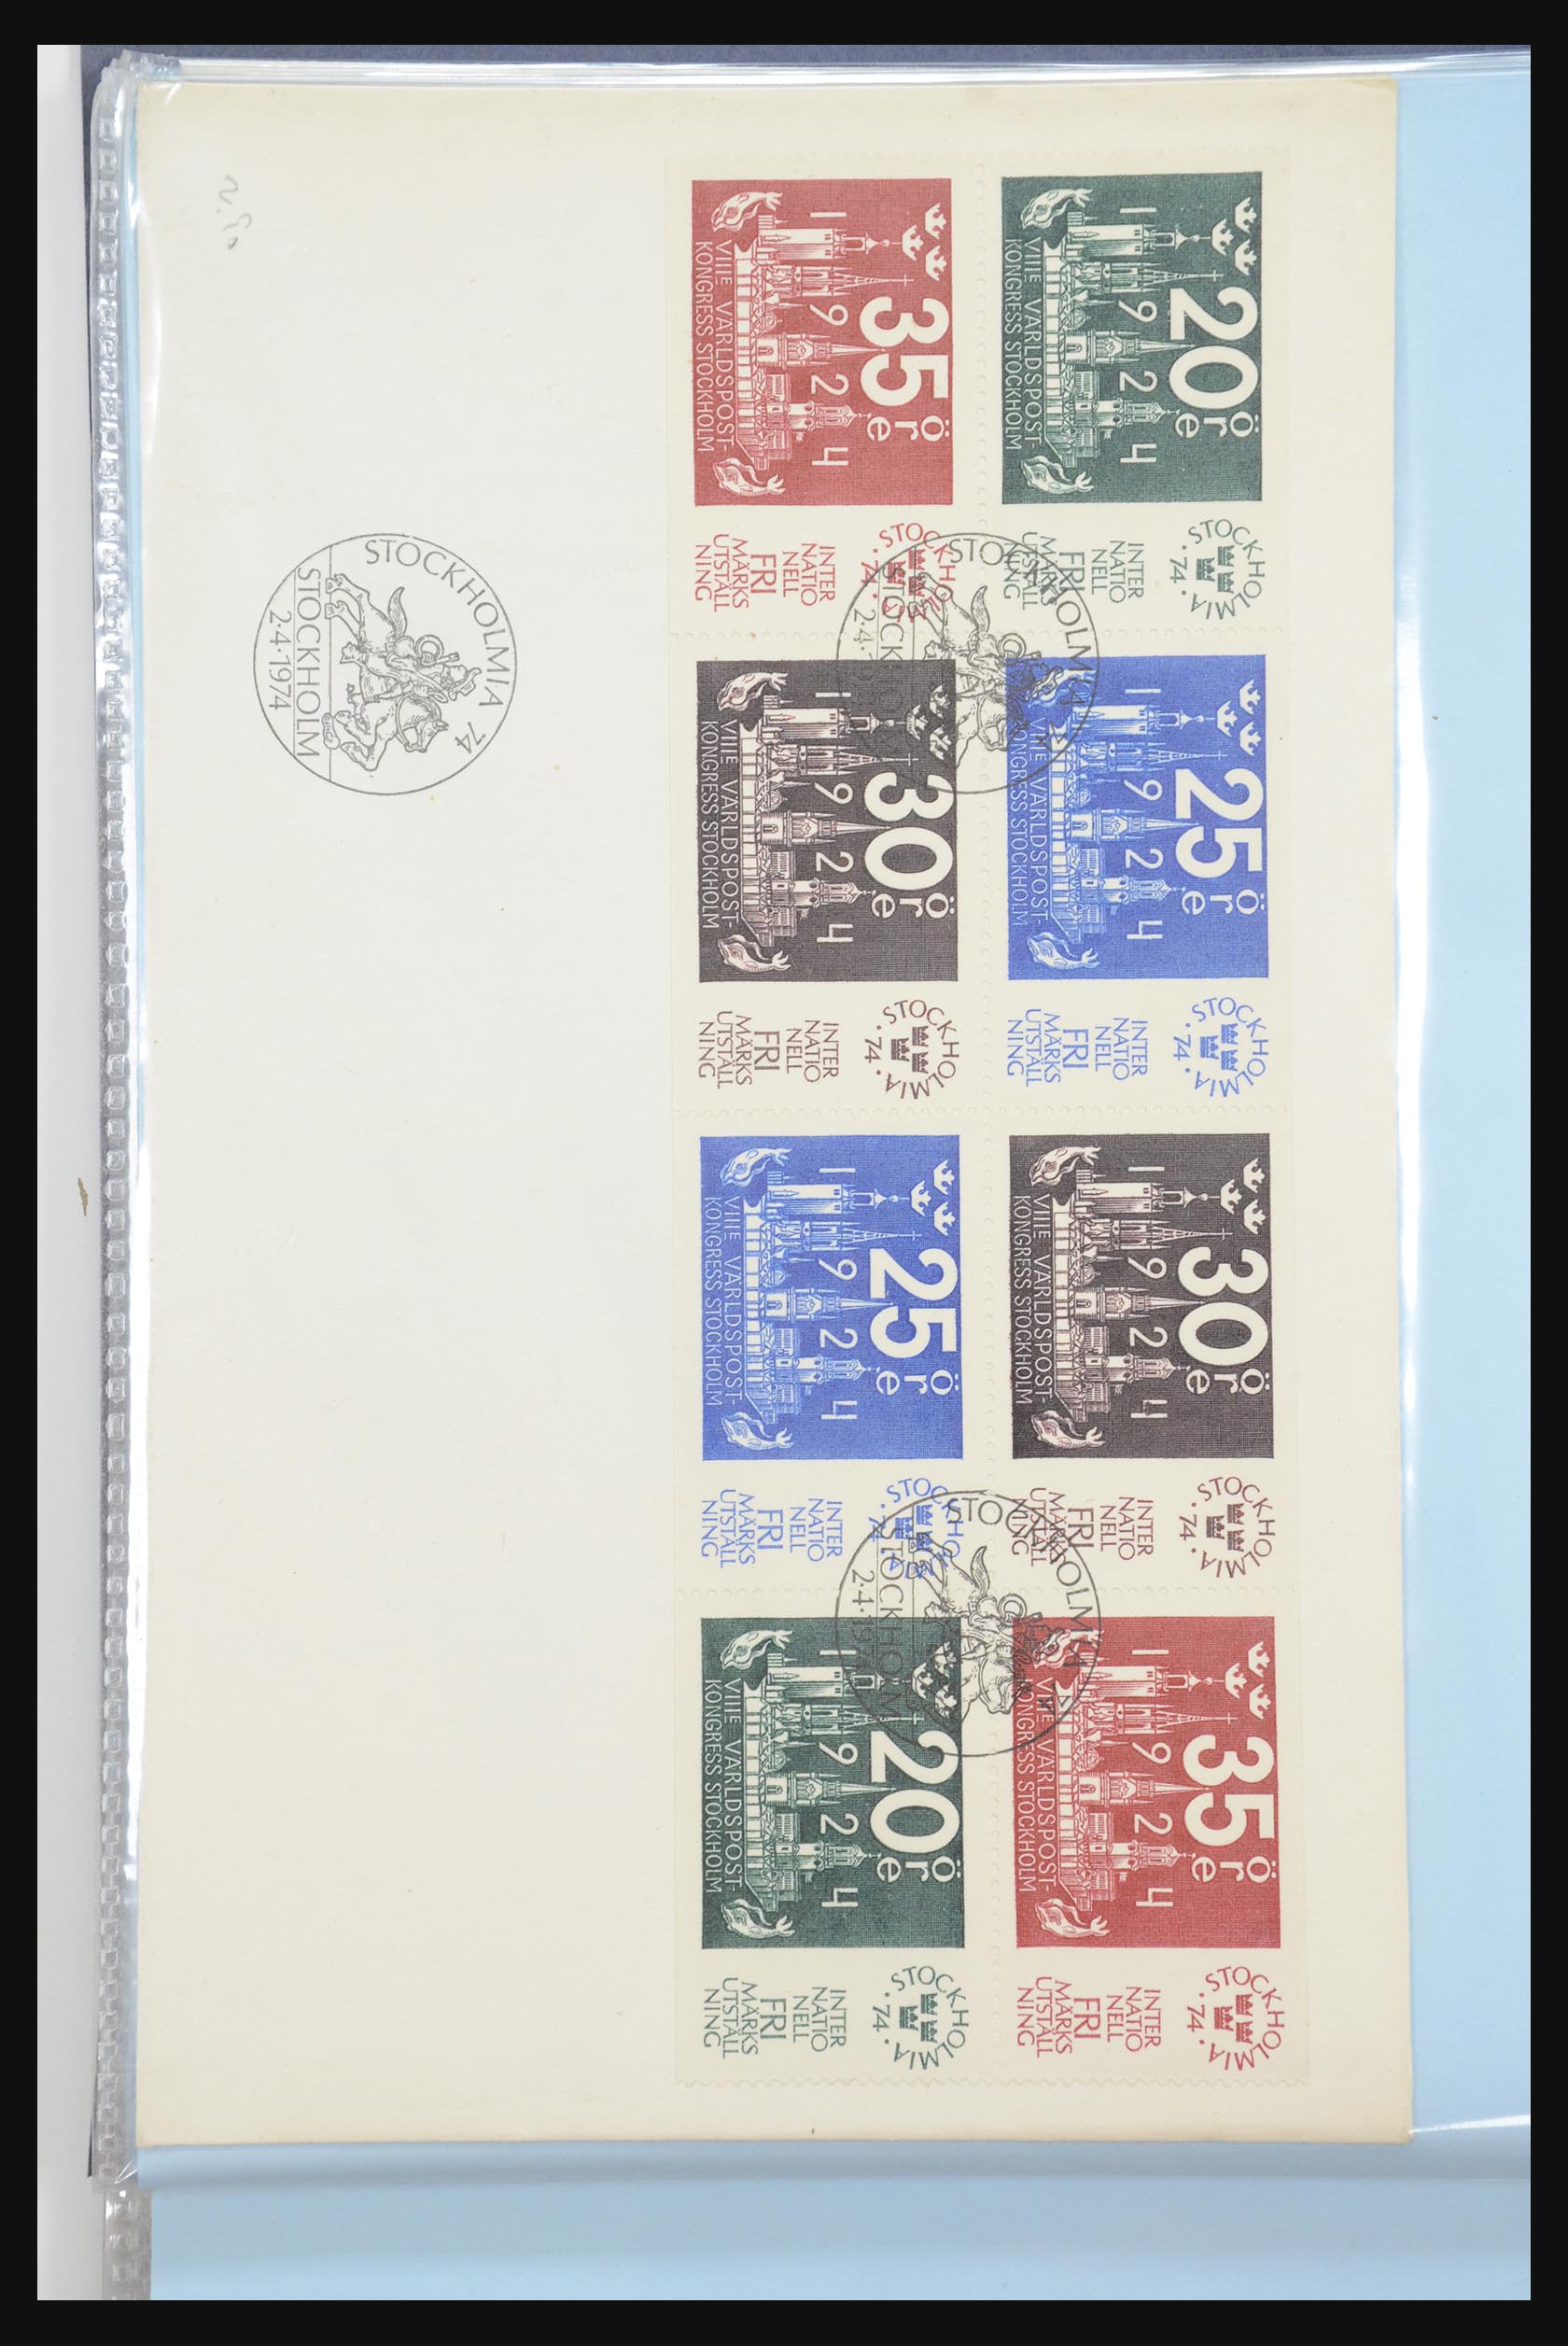 31915 108 - 31915 Western Europe souvenir sheets and stamp booklets on FDC.